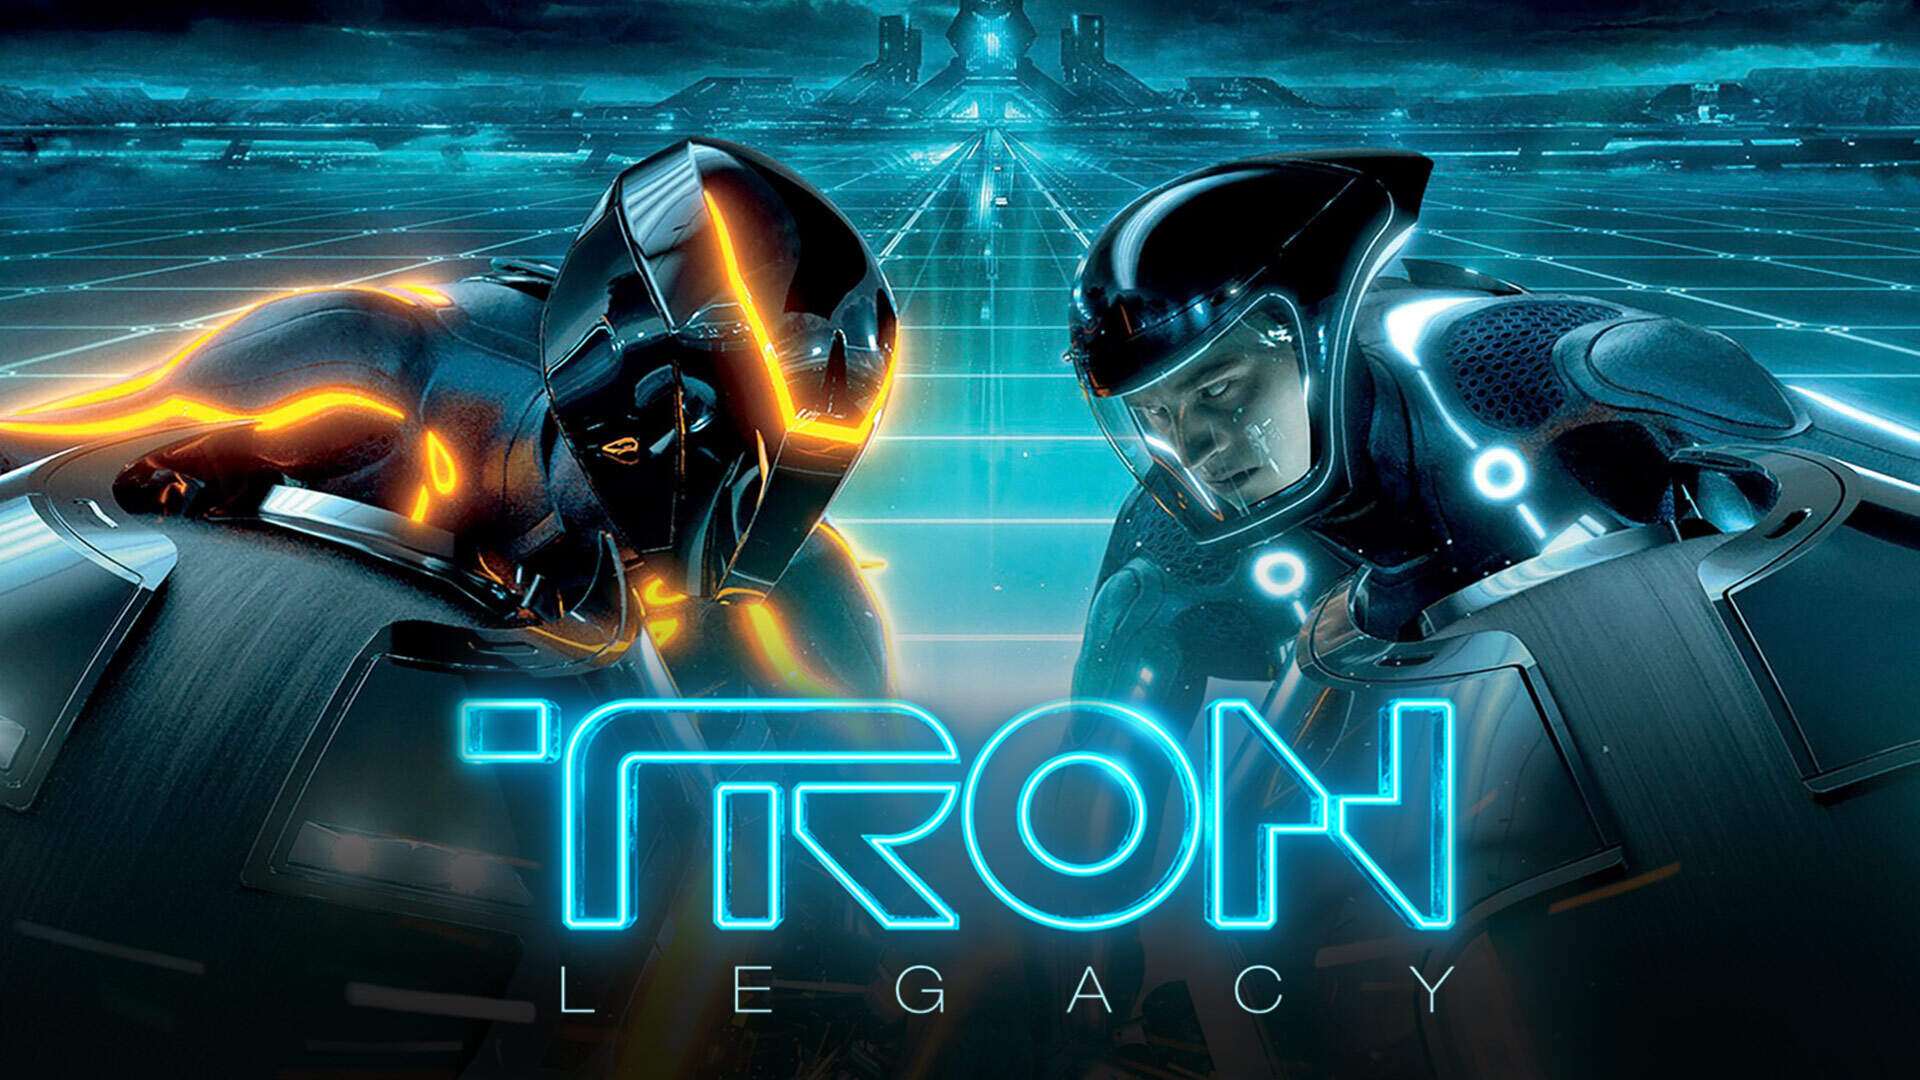 44-facts-about-the-movie-tron-legacy